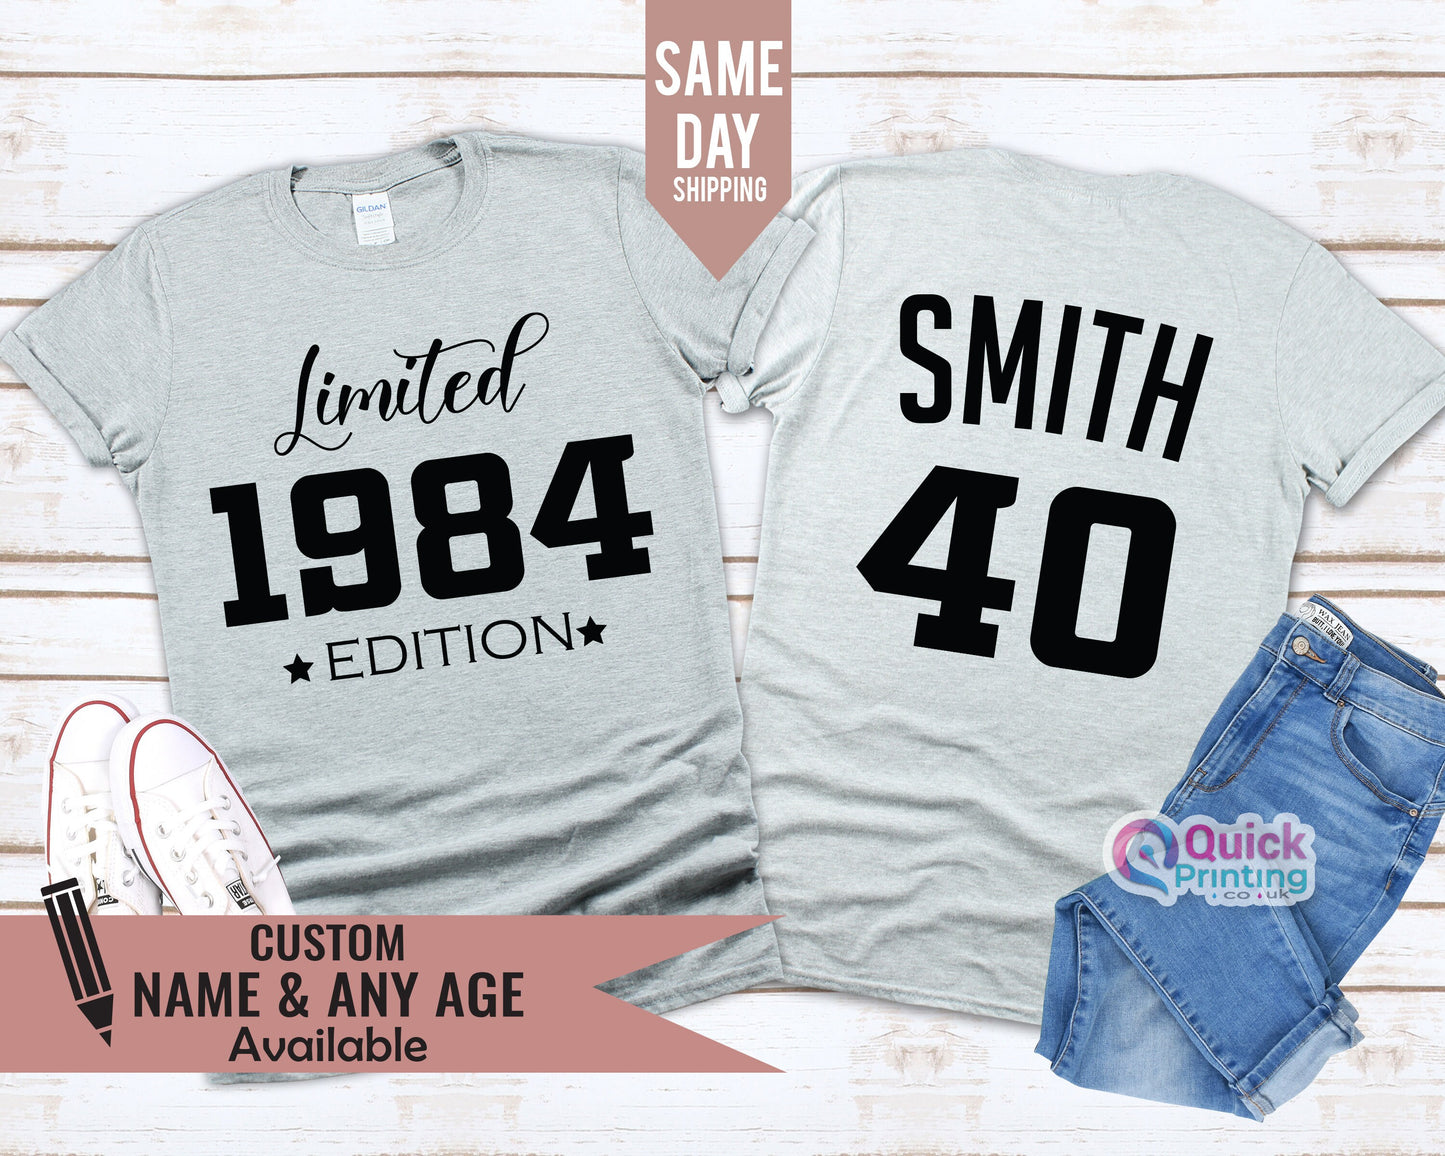 1984 Limited Edition Birthday TShirt 40th Custom Name Celebration Gift,Custom Birthday Gift Top UK,Limited edition DAD shirt Daughter Gift T